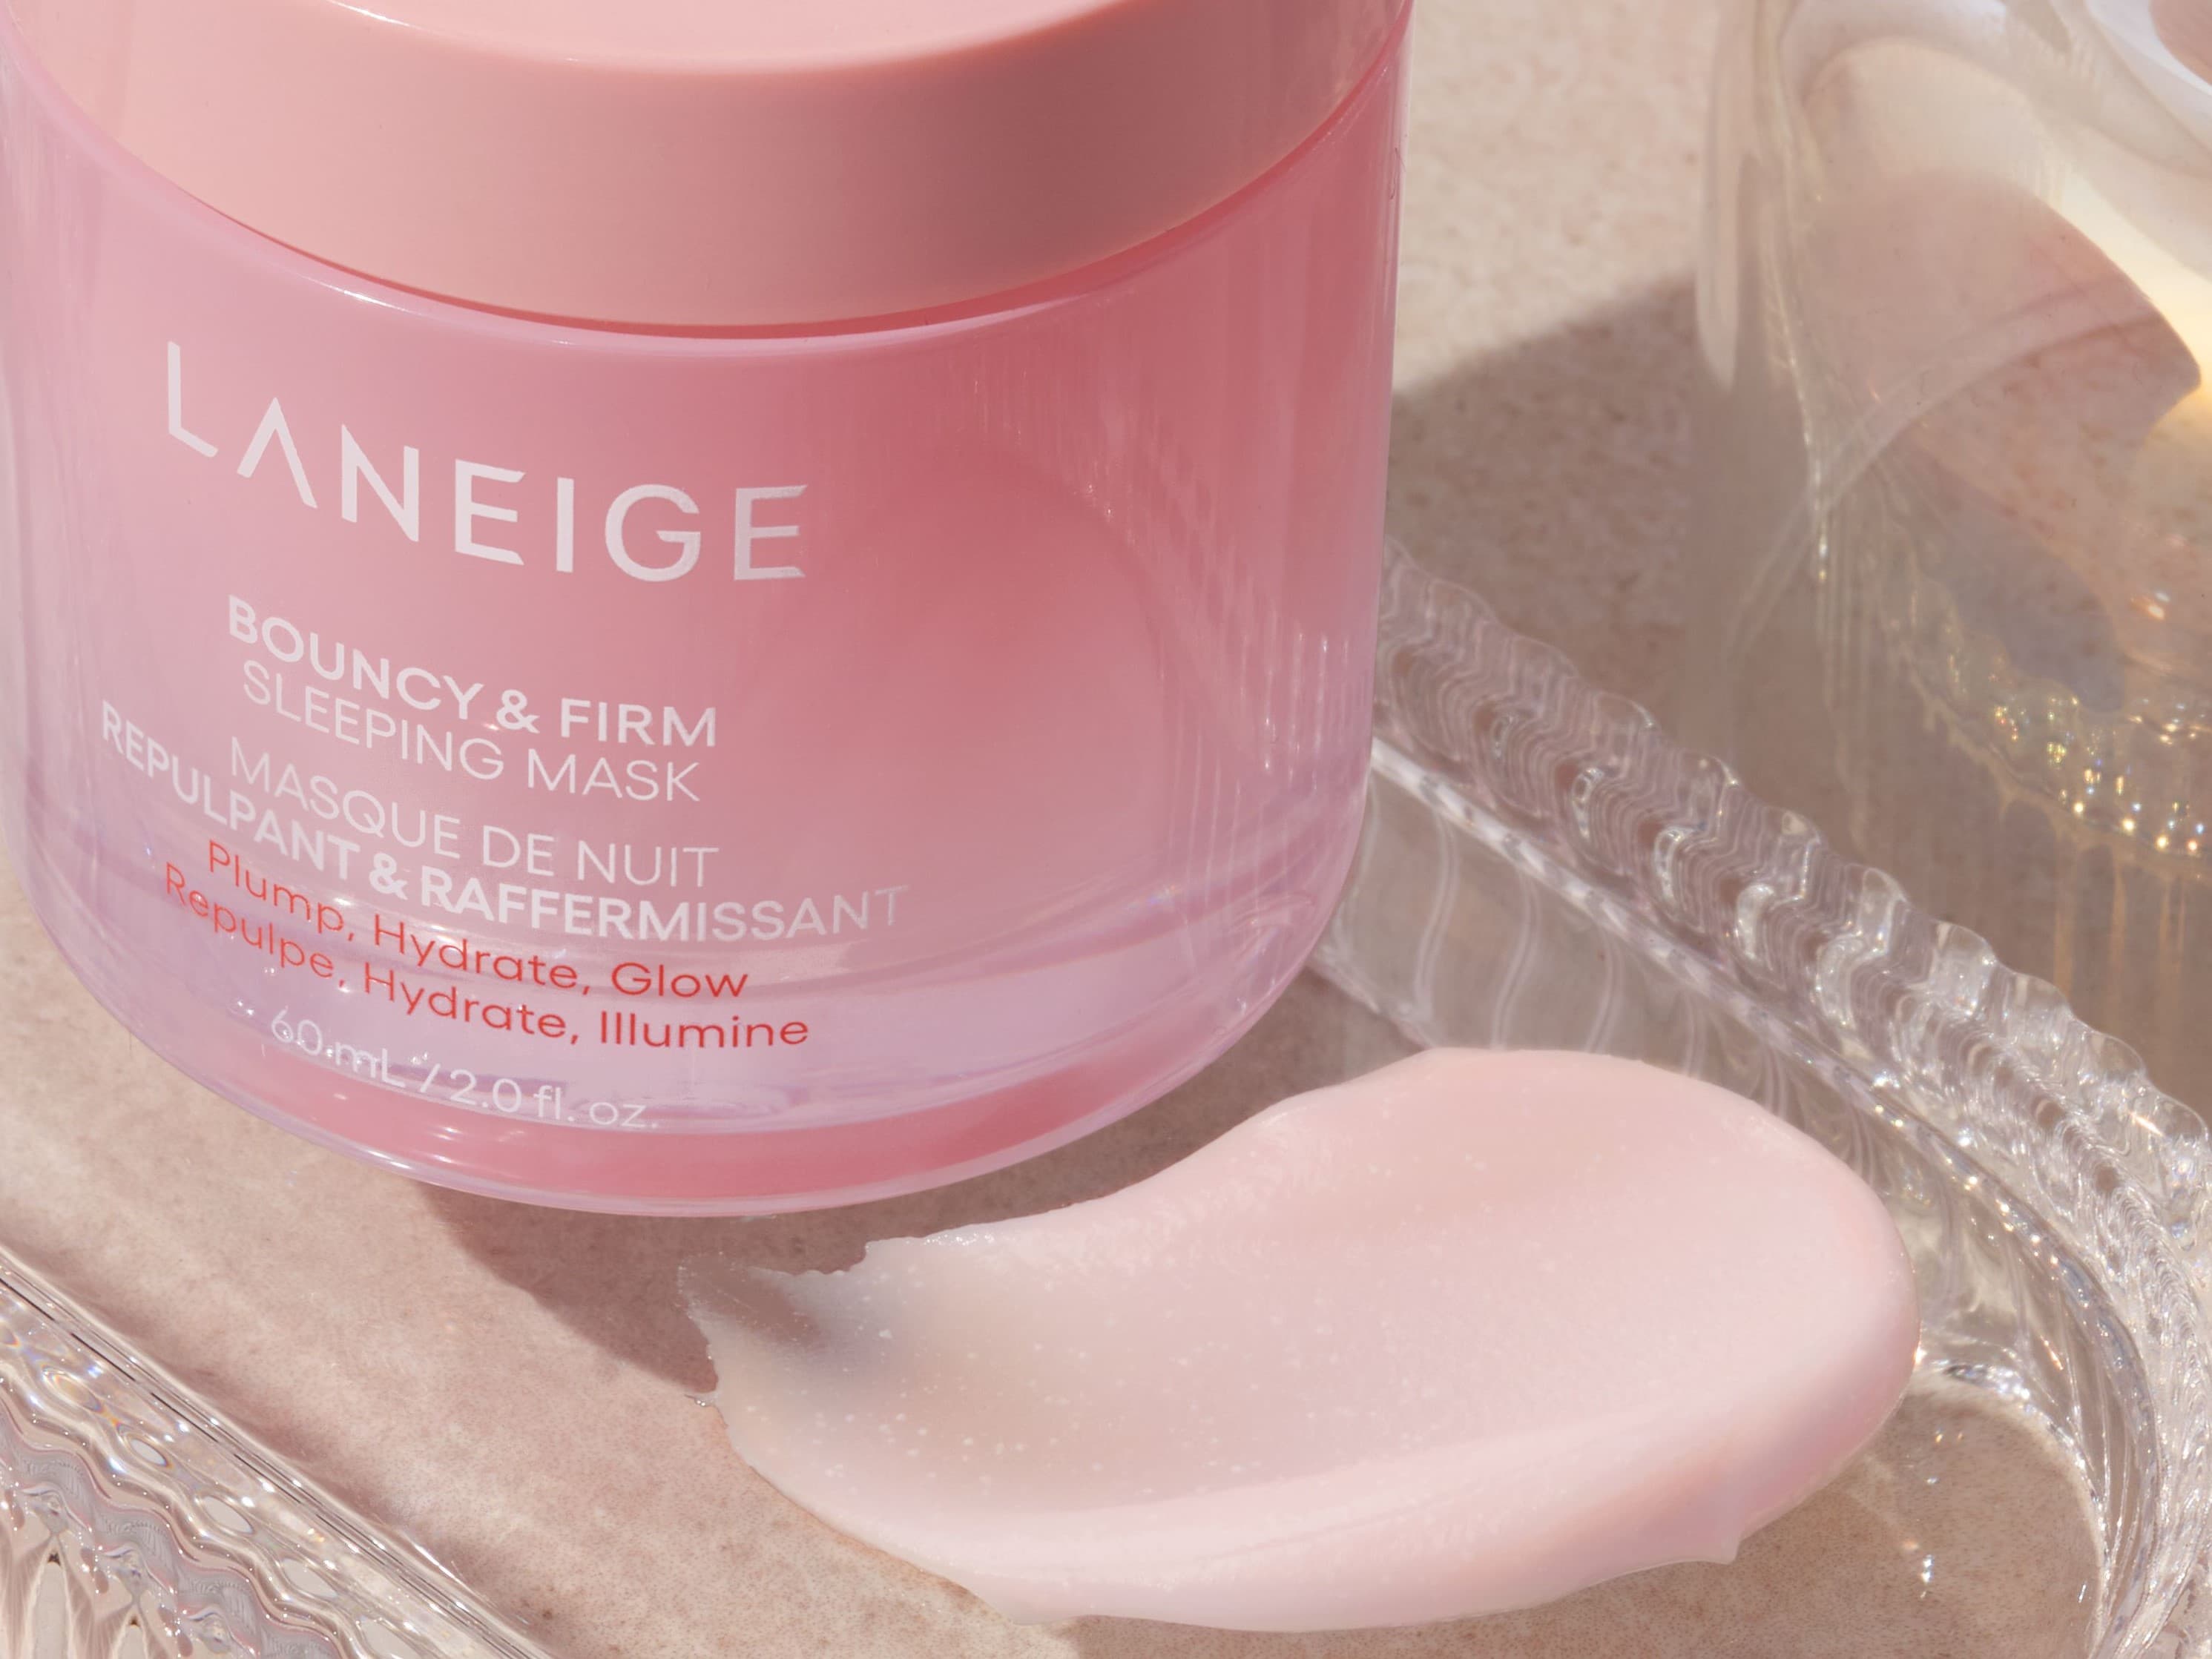 Laniege Bouncy and Firm Sleeping Mask review | Space NK